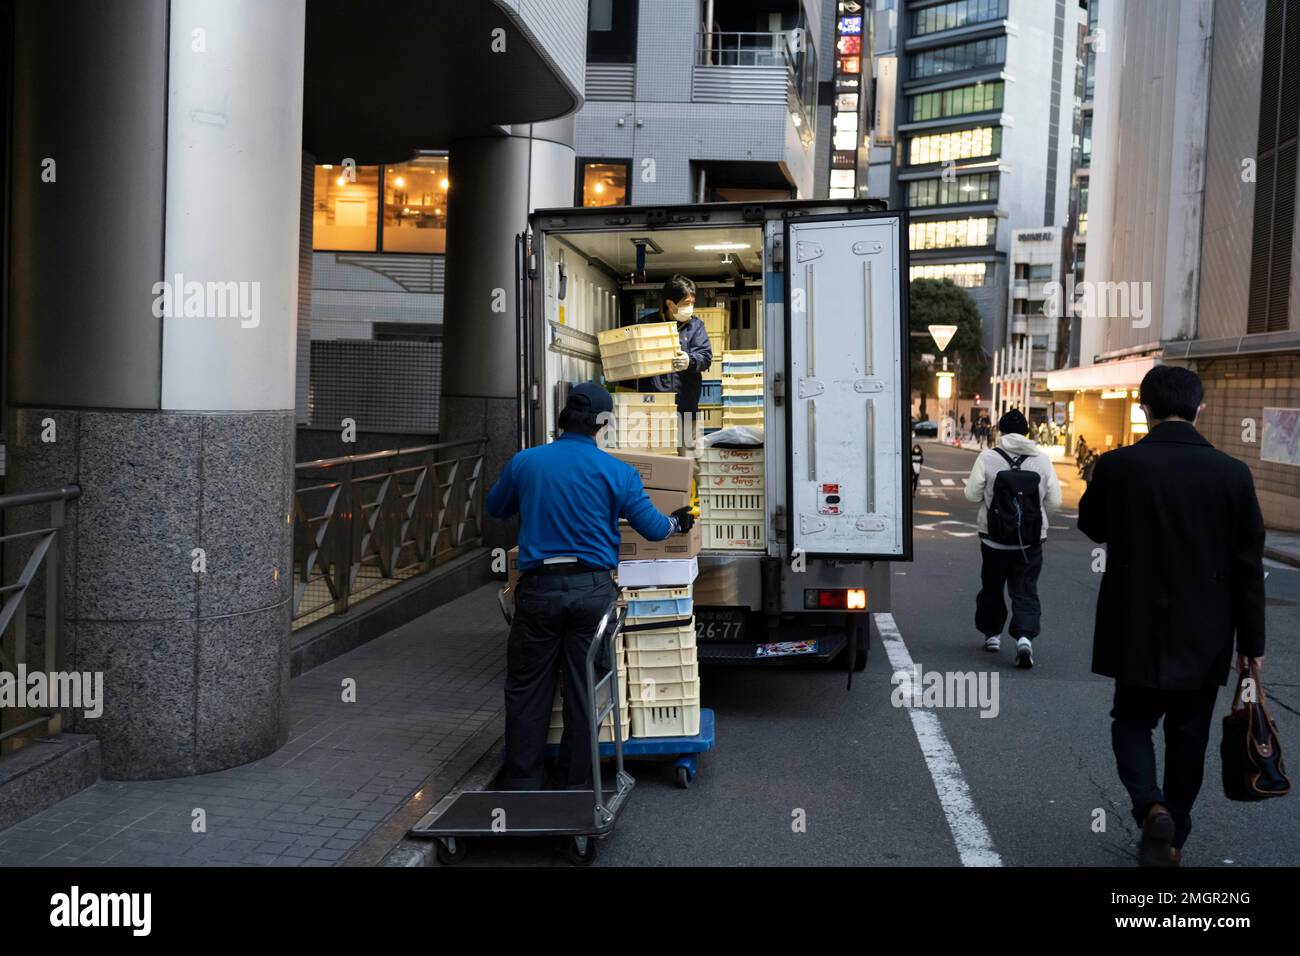 Tokyo, Japan. 26th Jan, 2023. Logistics delivery workers prepare a shipment to to deliver food products to a Japanese restaurant in the busy commercial district of Shibuya. Food and beverage industry, hospitality. The Japanese economy remains stagnant as workers' wages have not increased in 30 years at the same time as the Bank of Japan's longtime negative interest rates have caused the Yen to struggle against the US Dollar due to the United States' Fed Funds rate hikes to combat inflation. This has promoted severe international trade concerns as Japan is a major trading partner with Ameri Stock Photo